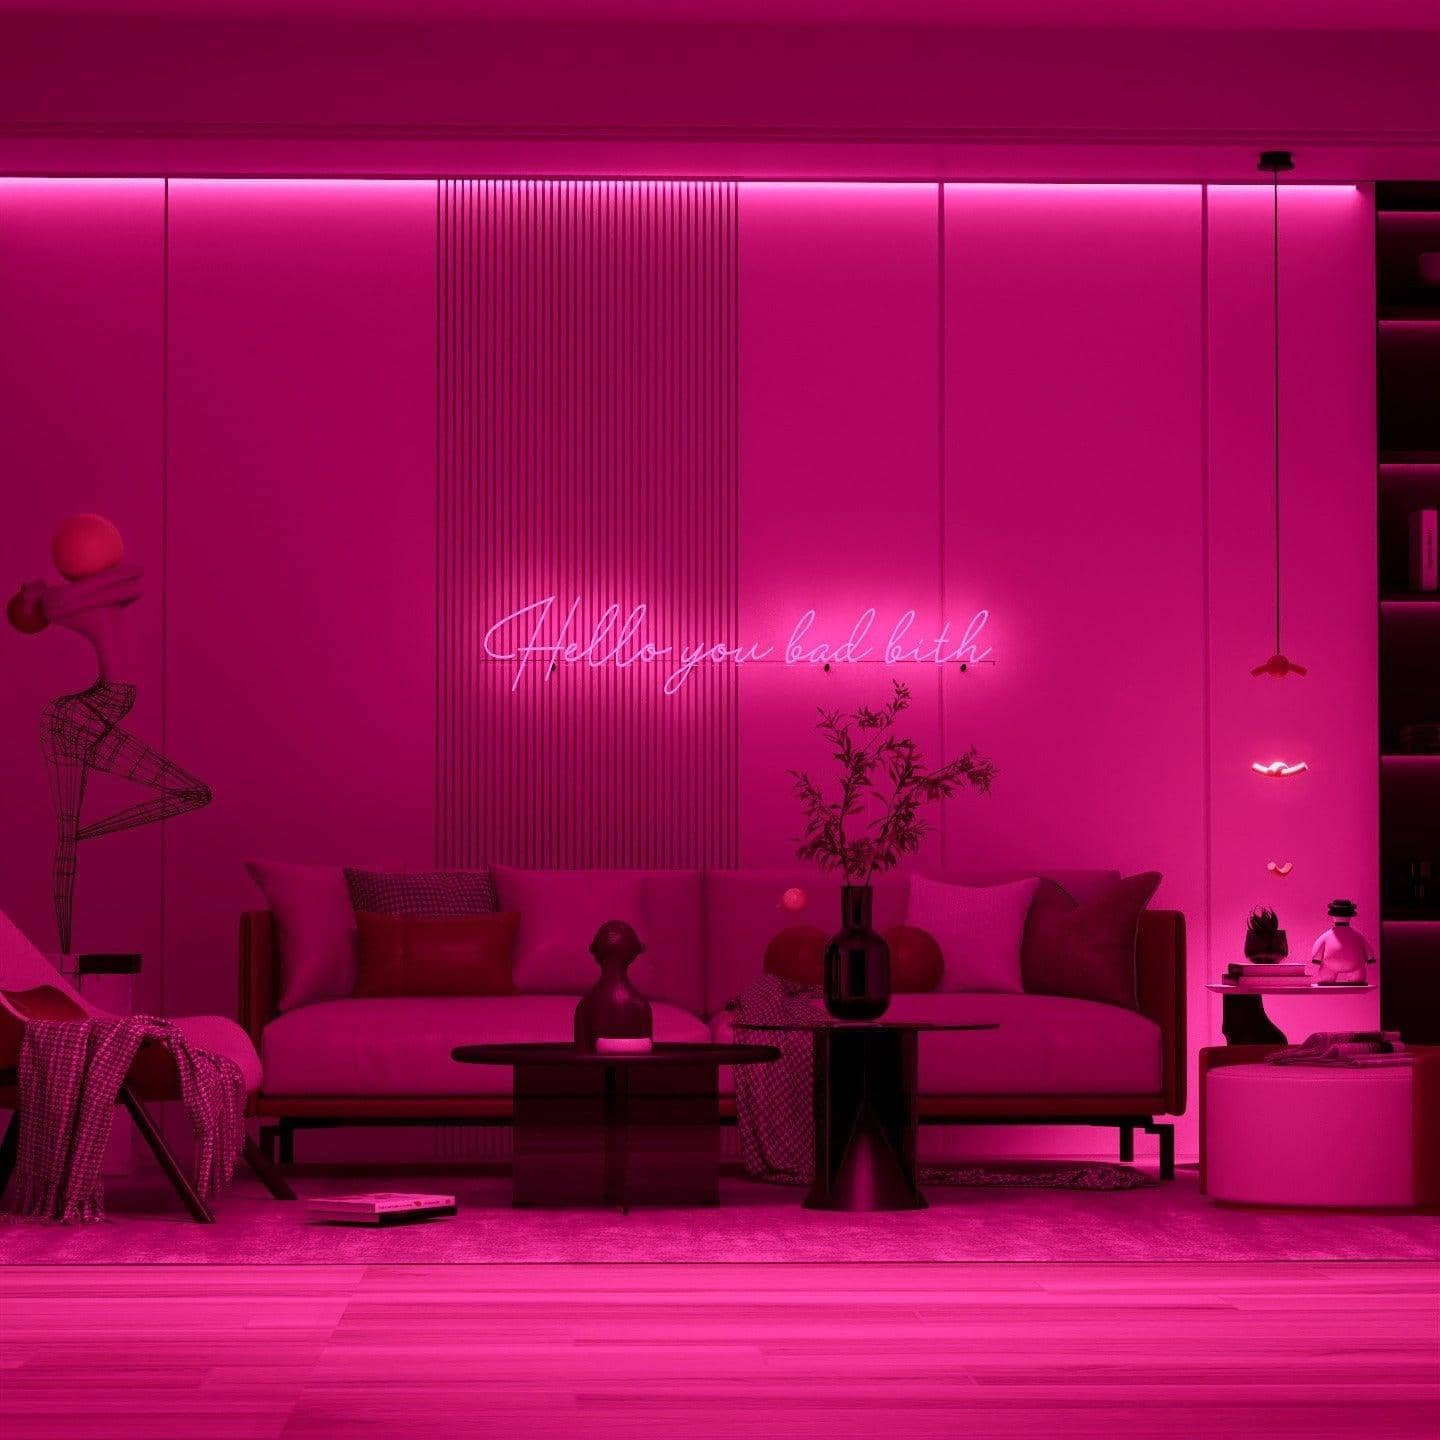 night-shot-of-lit-pink-neon-lights-hanging-on-the-wall-for-display-hello-you-bad-bith